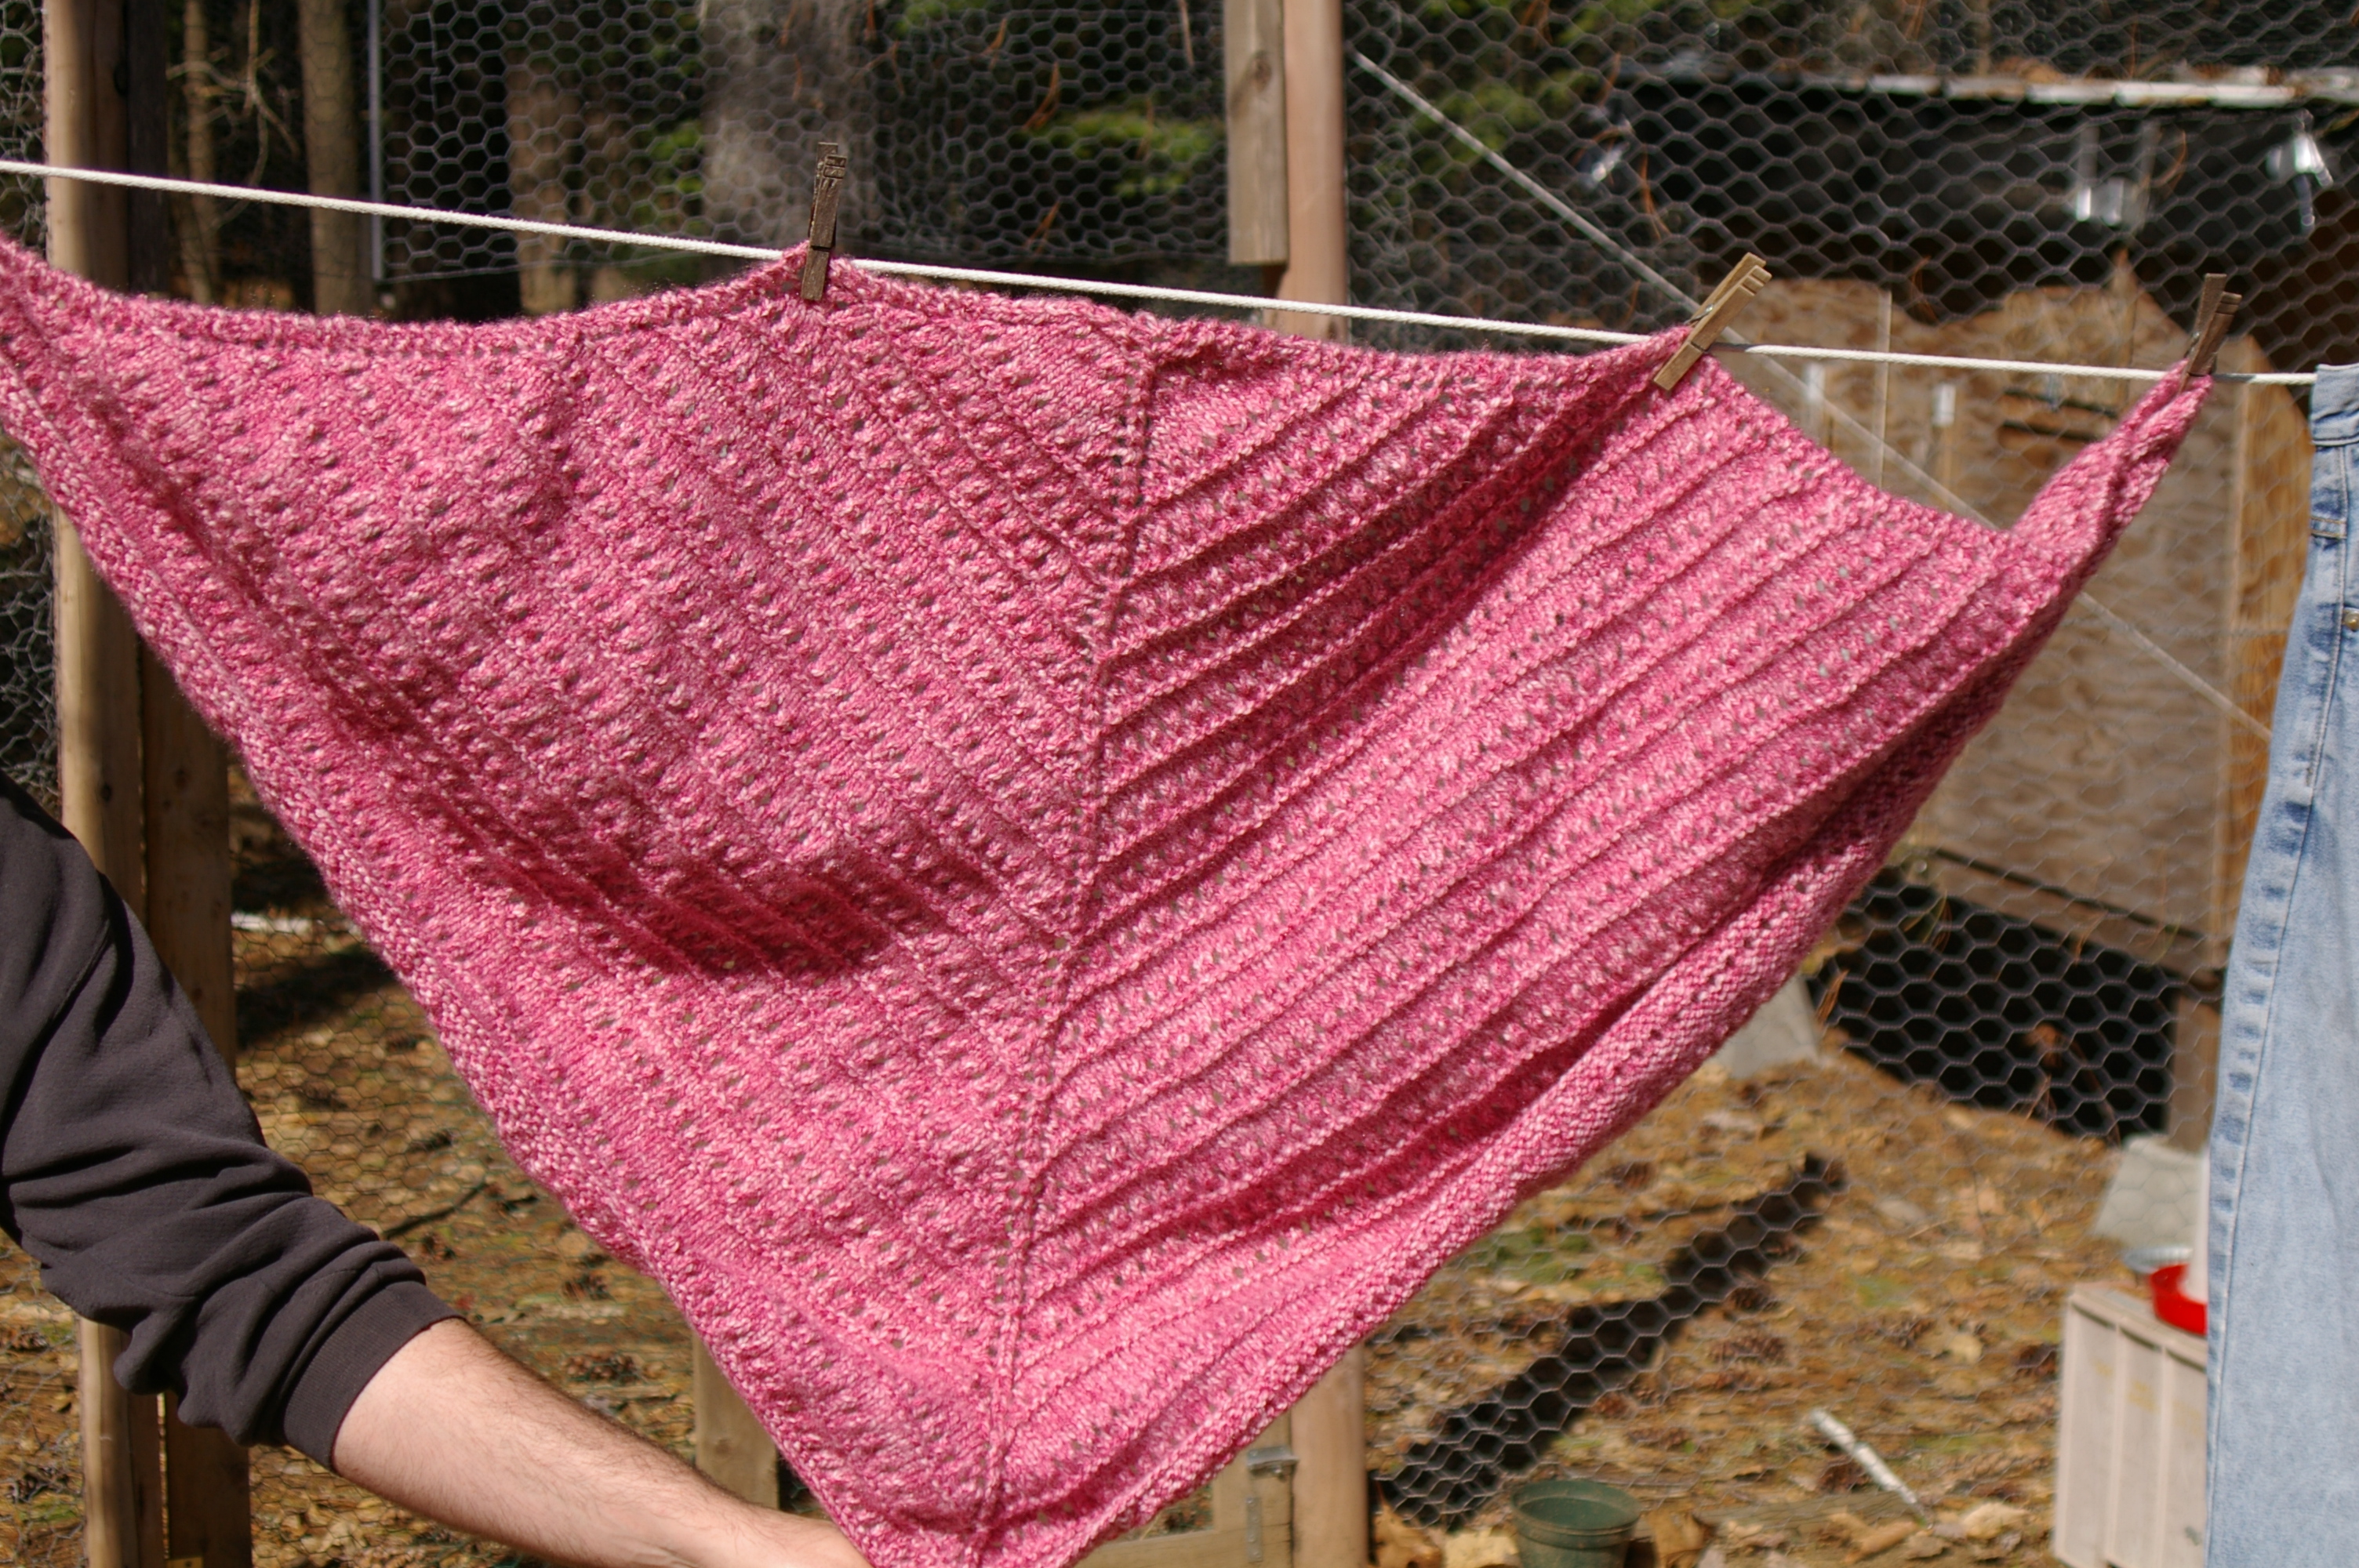 Knitting Pattern Central - Free Shawls and Stoles Knitting Pattern